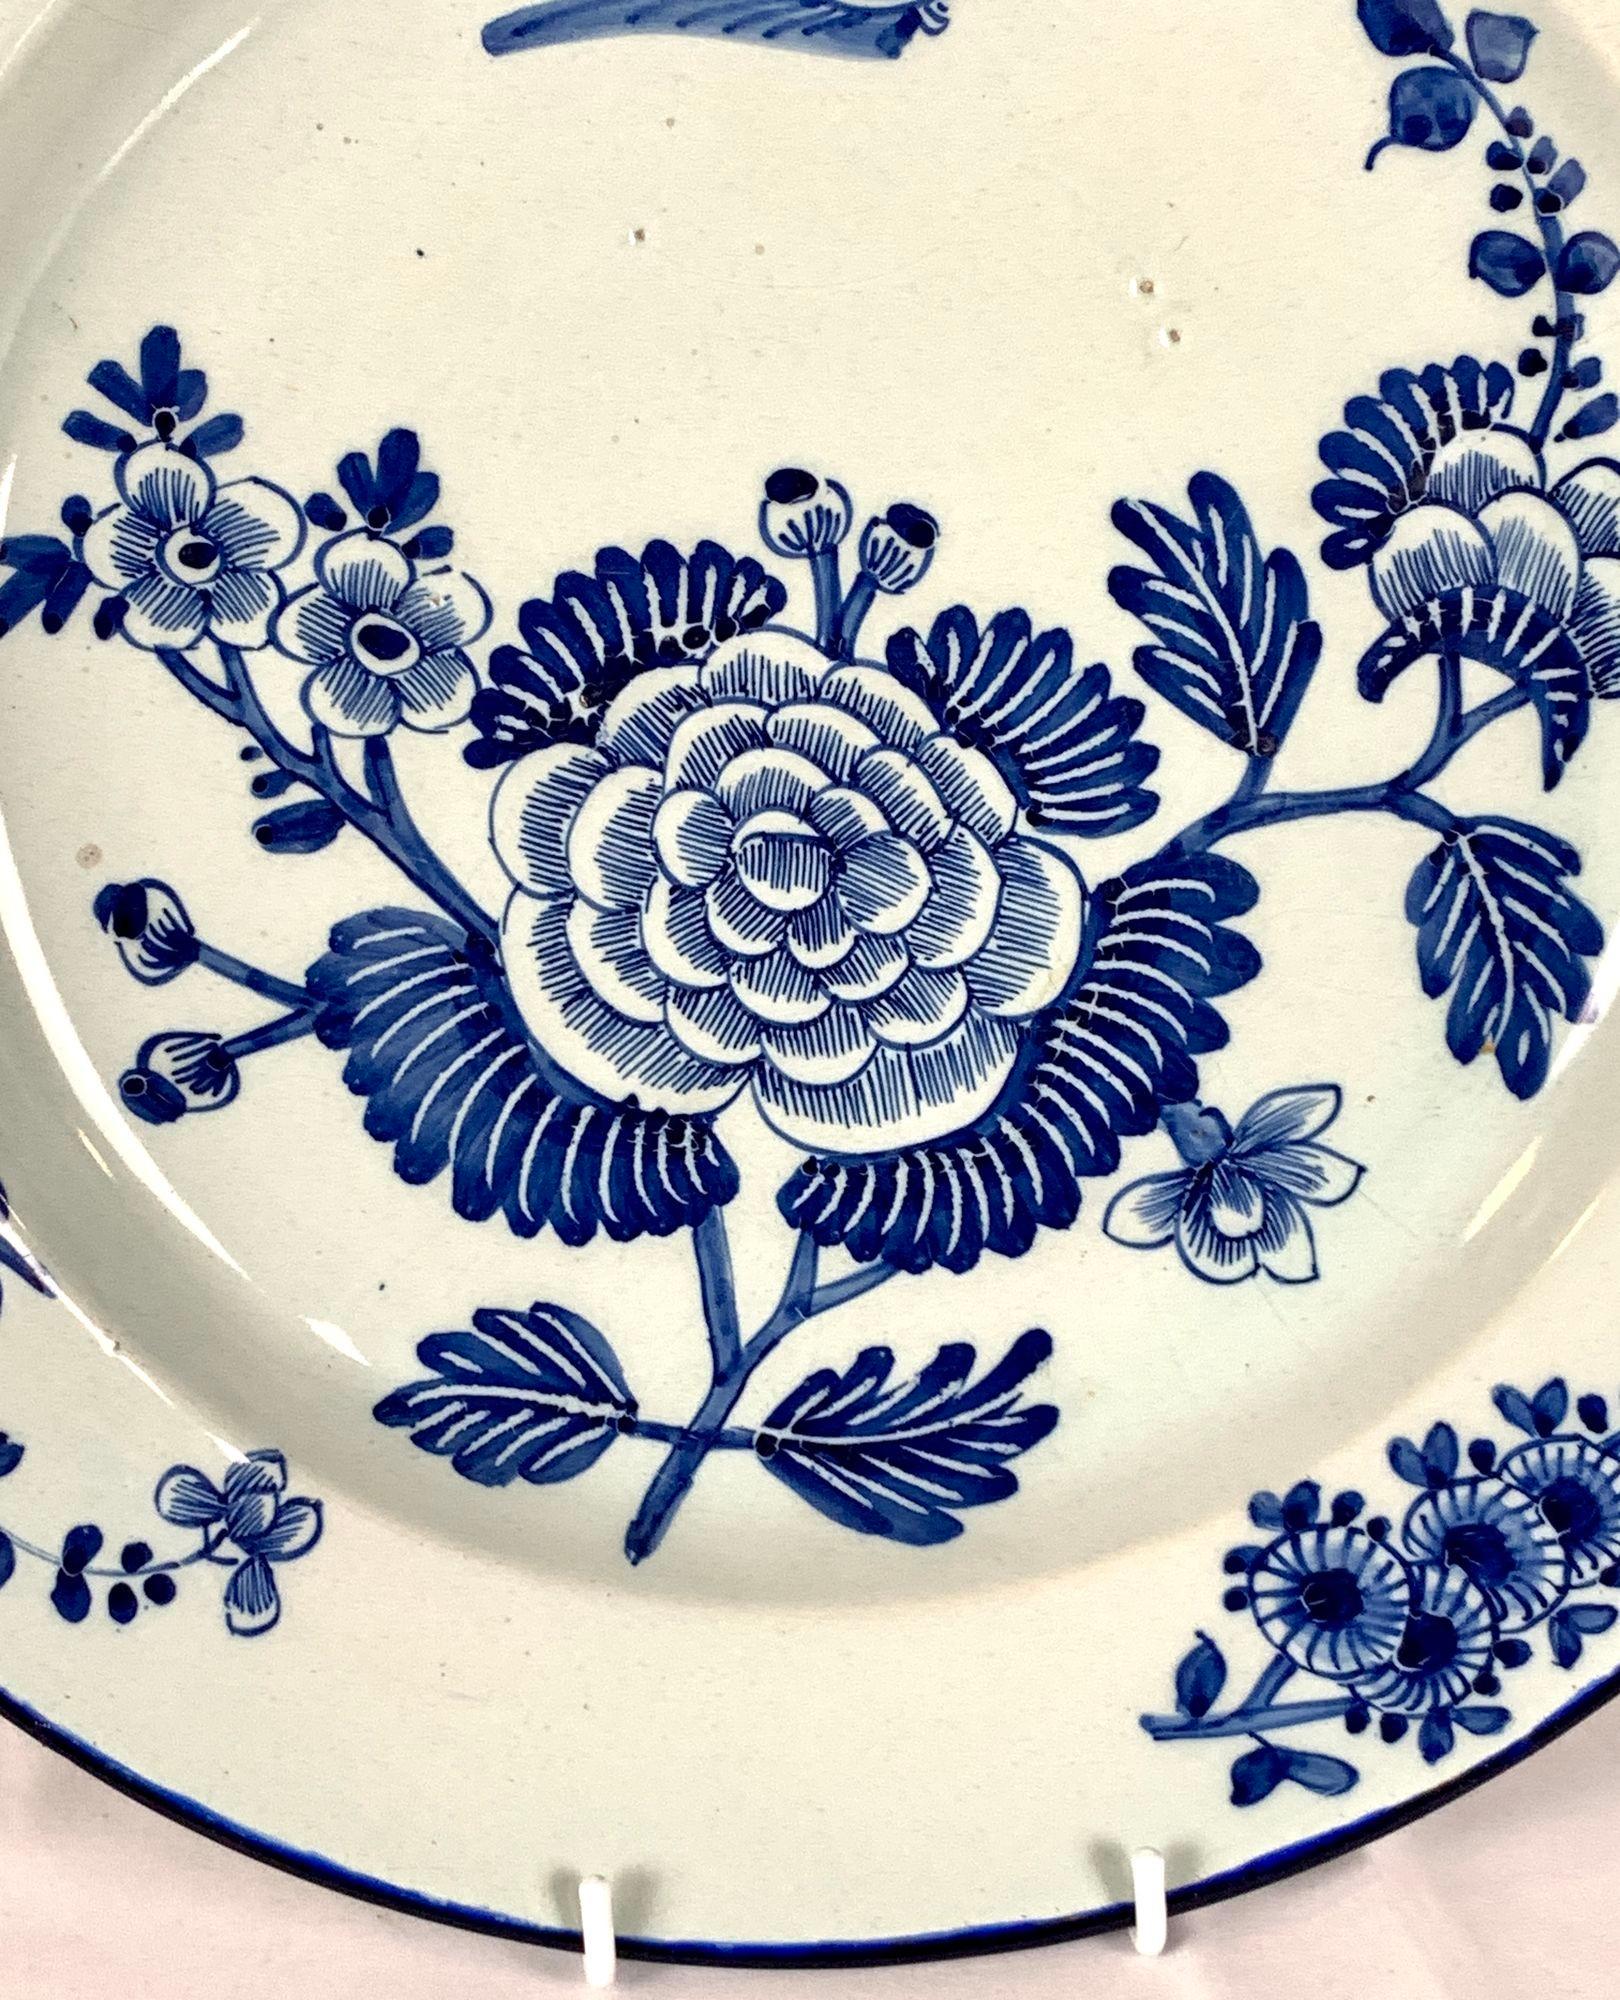 Blue and White Dutch Delft Charger Hand Painted Mid 18th Century Circa 1760 For Sale 3